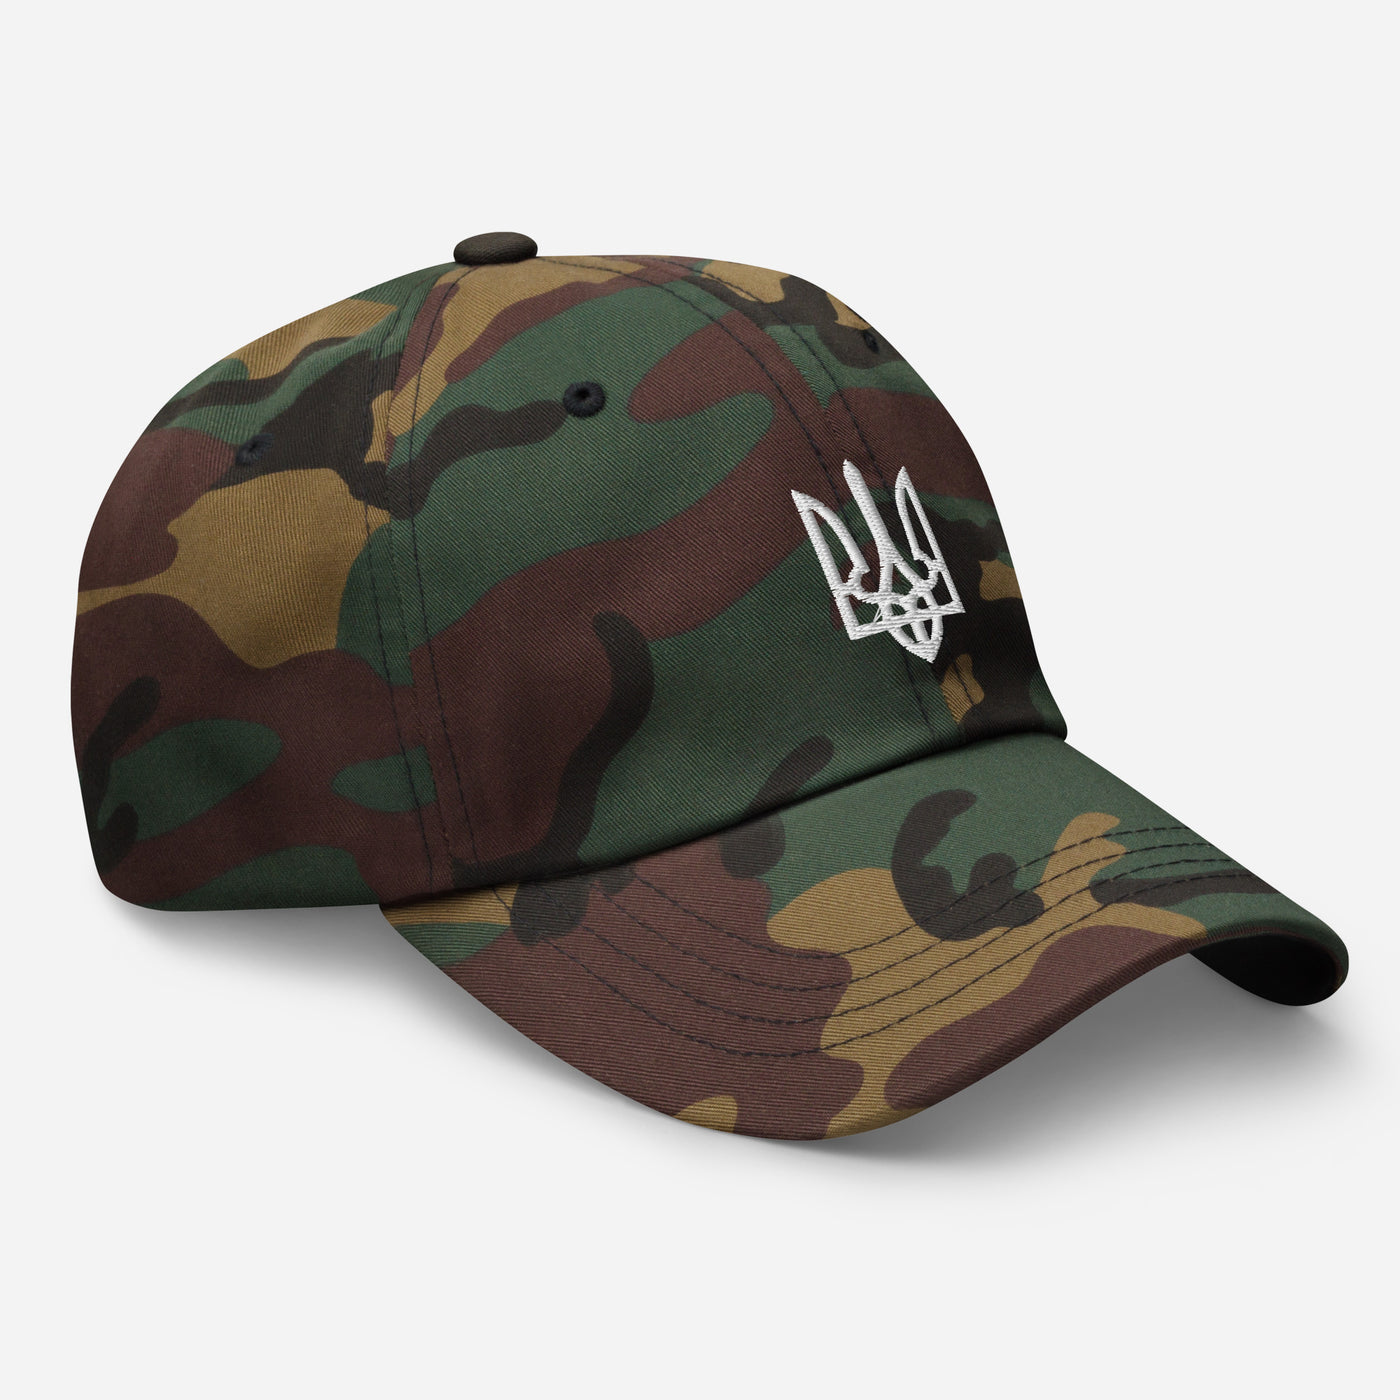 Trident of Freedom Big Cap Embroidery